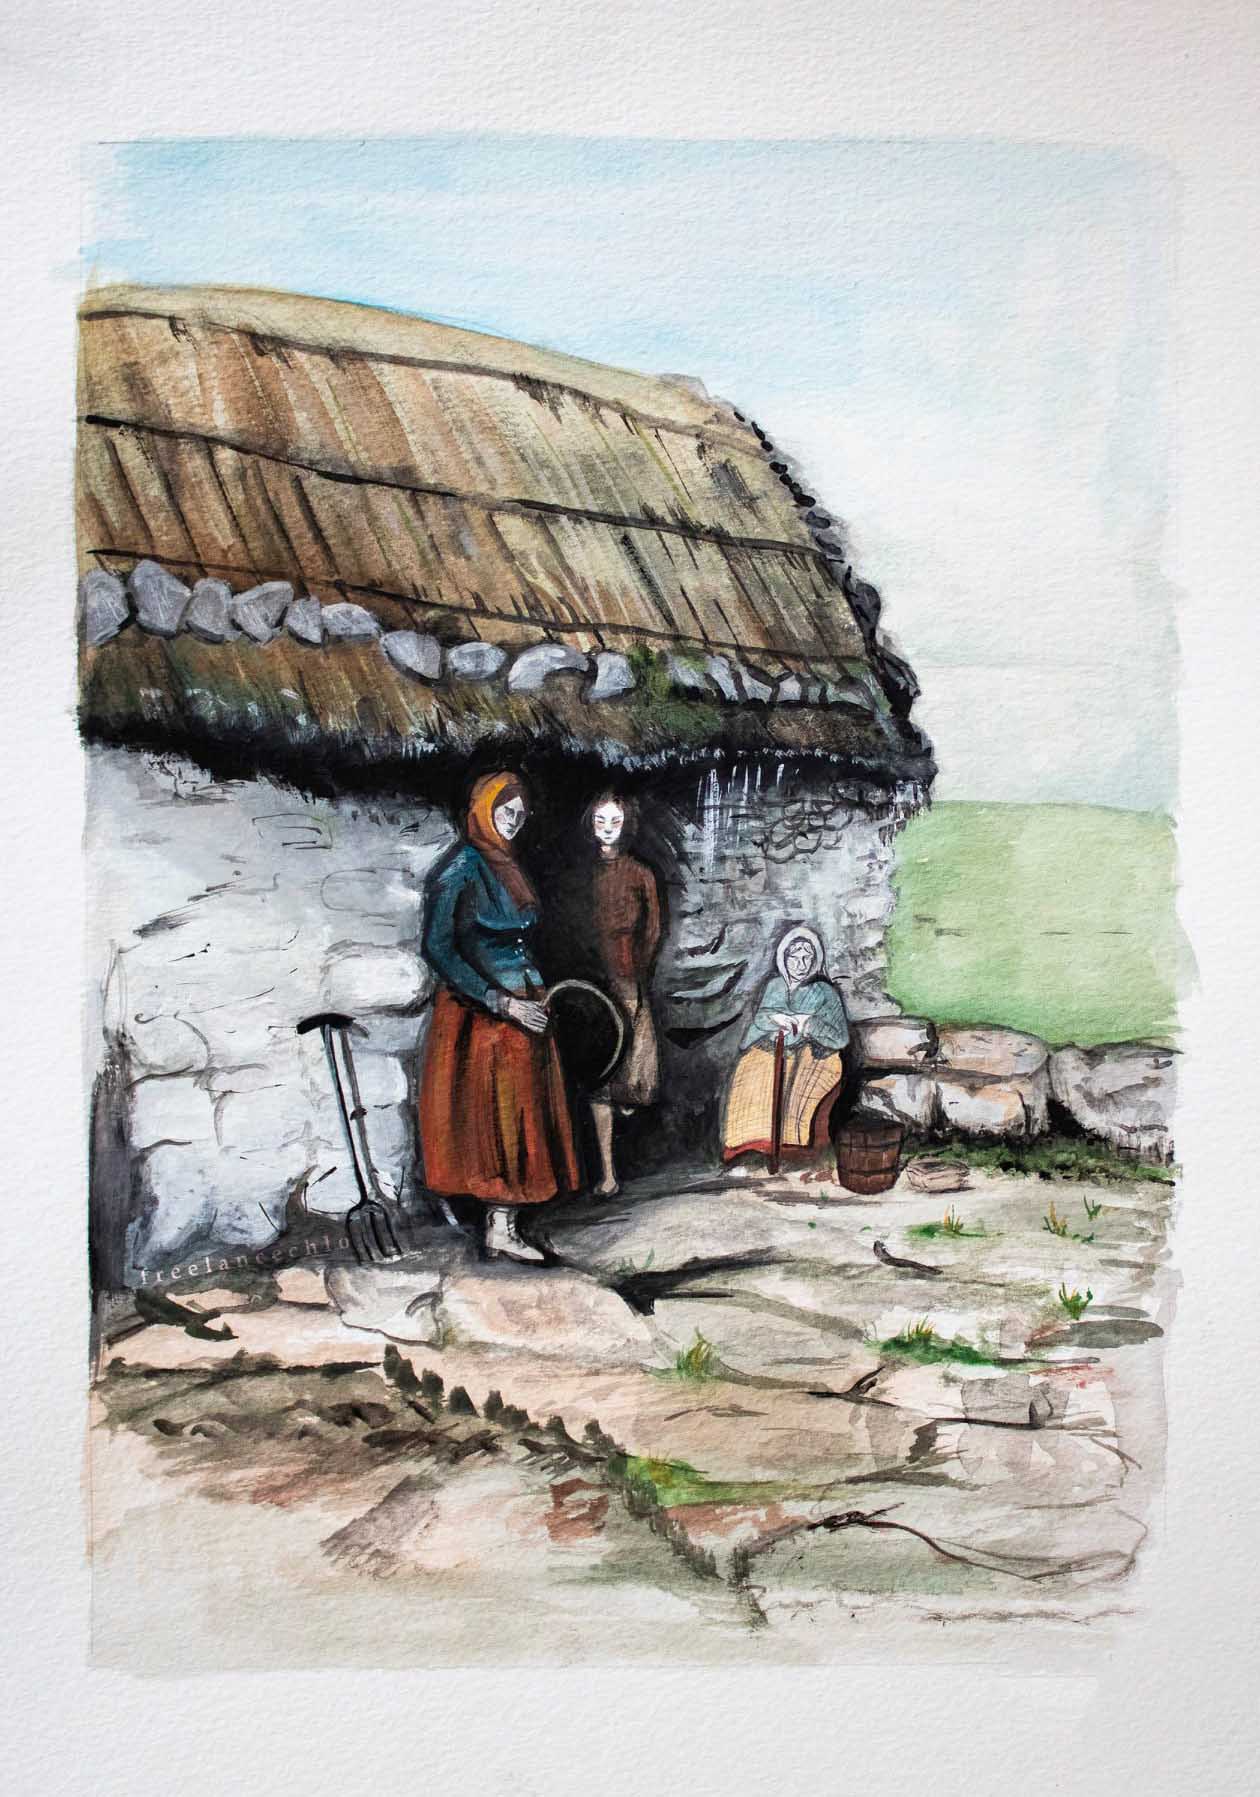 Three generations of women stood outside of a thatched irish cottage, one with a sickle in hand